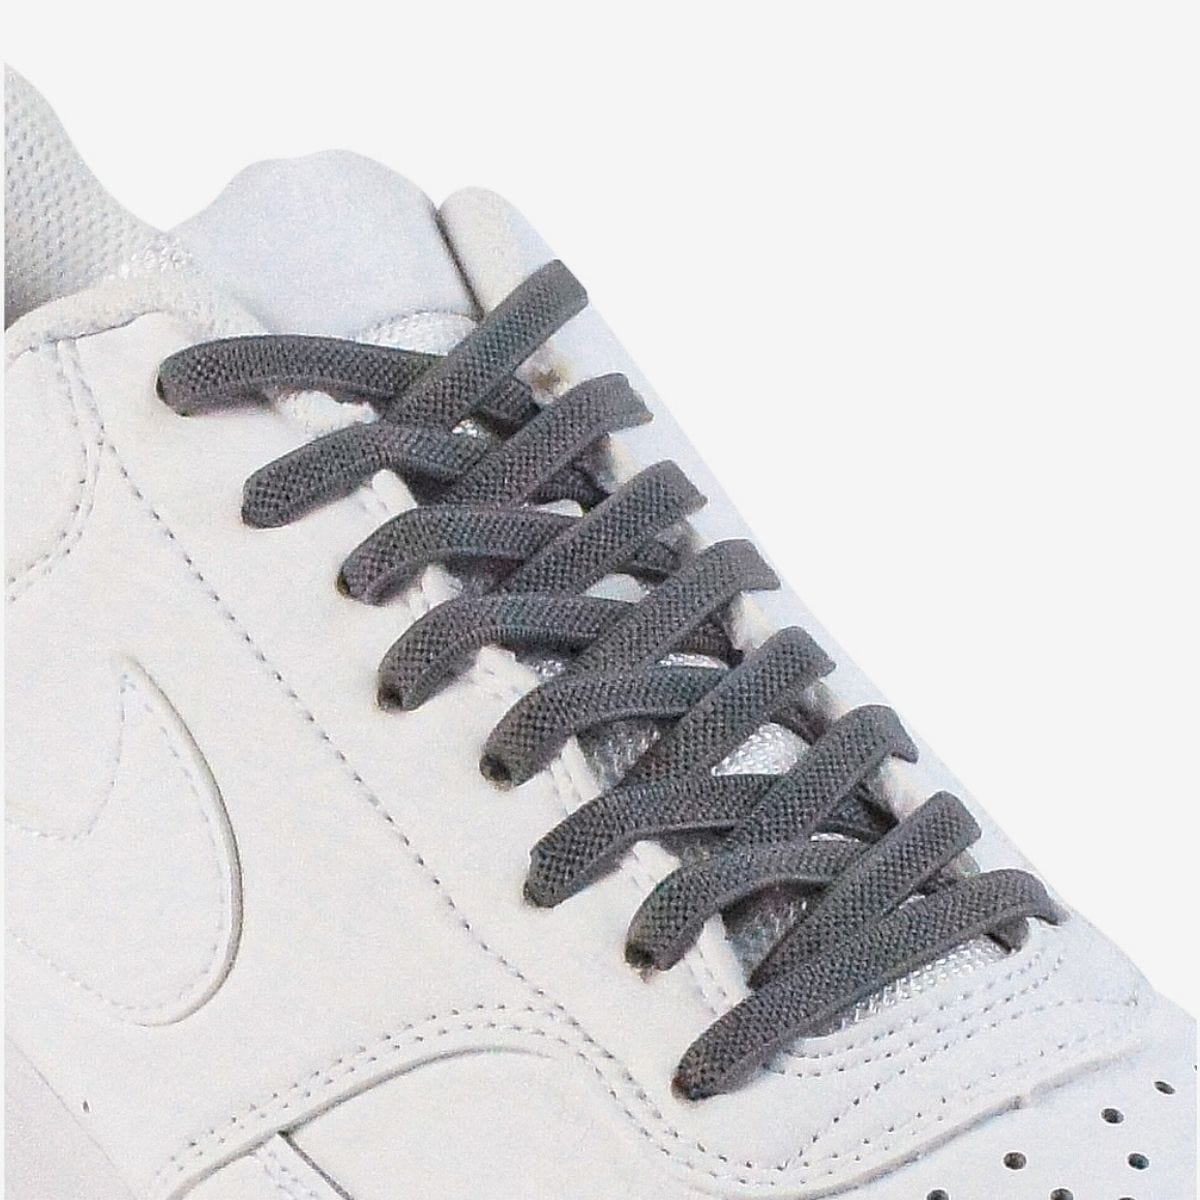 kids-no-tie-shoelaces-with-dark-grey-laces-on-nike-white-sneakers-by-kicks-shoelaces